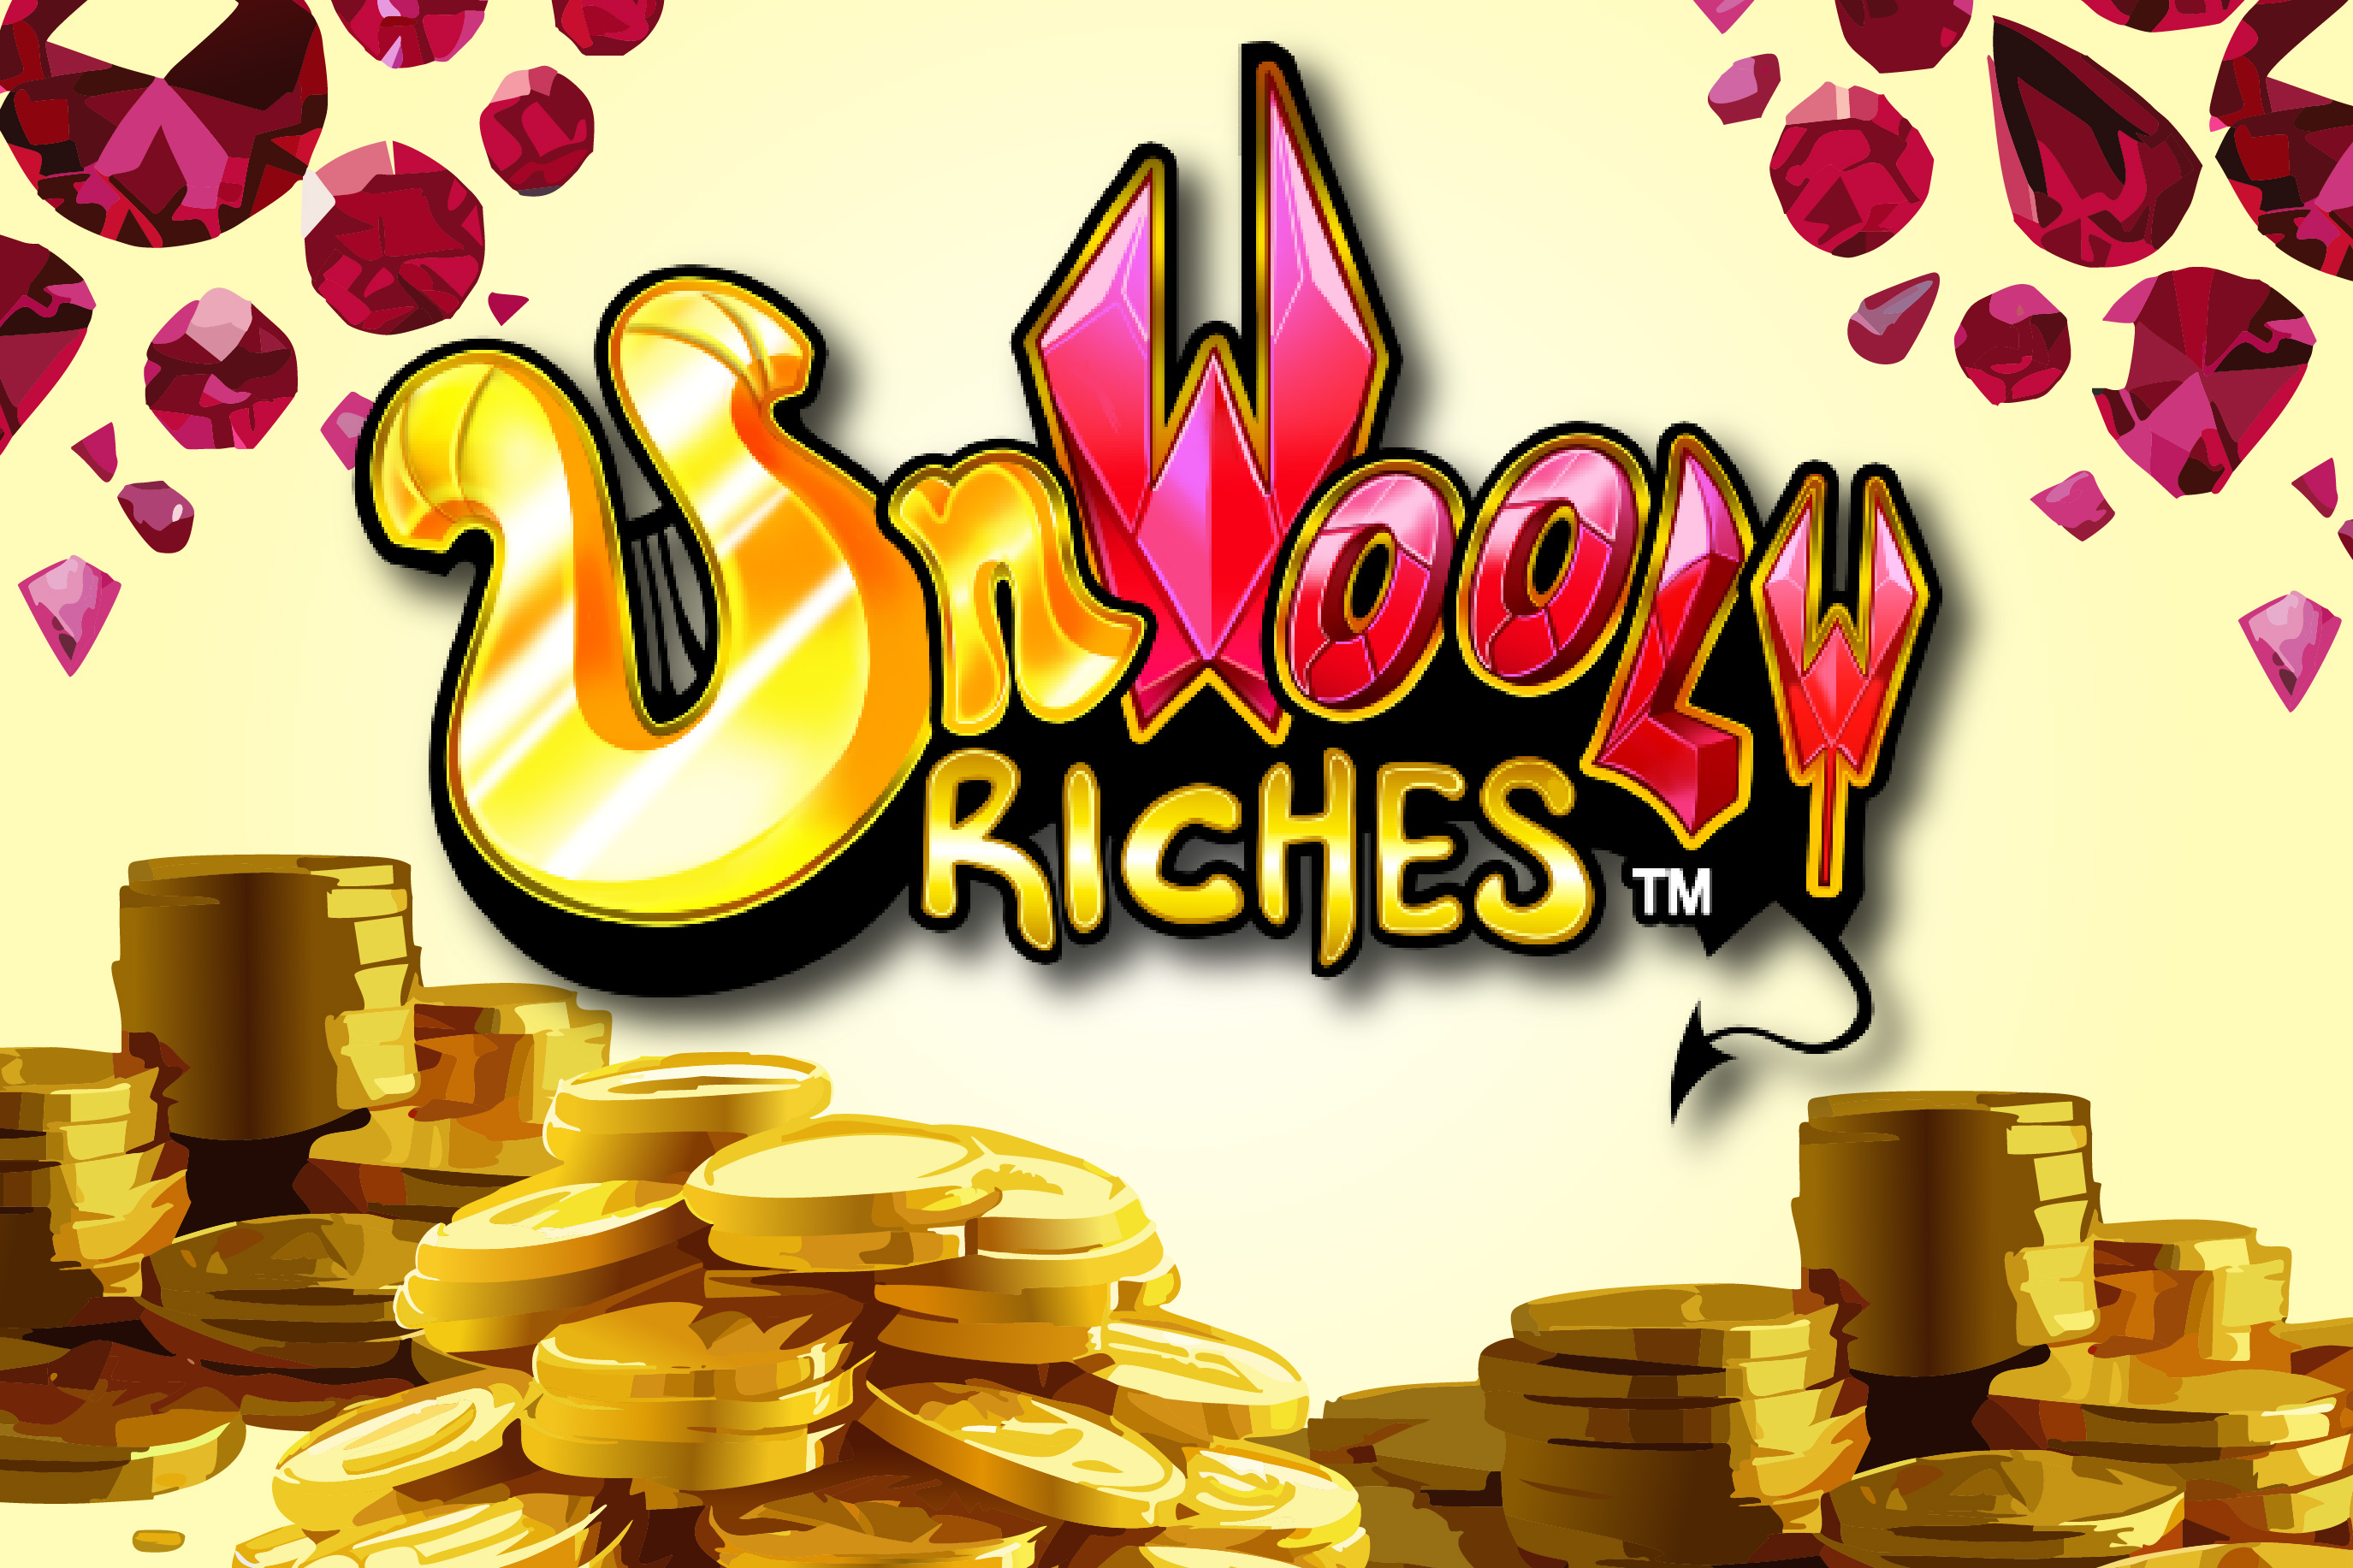 Unwooly Riches slots design